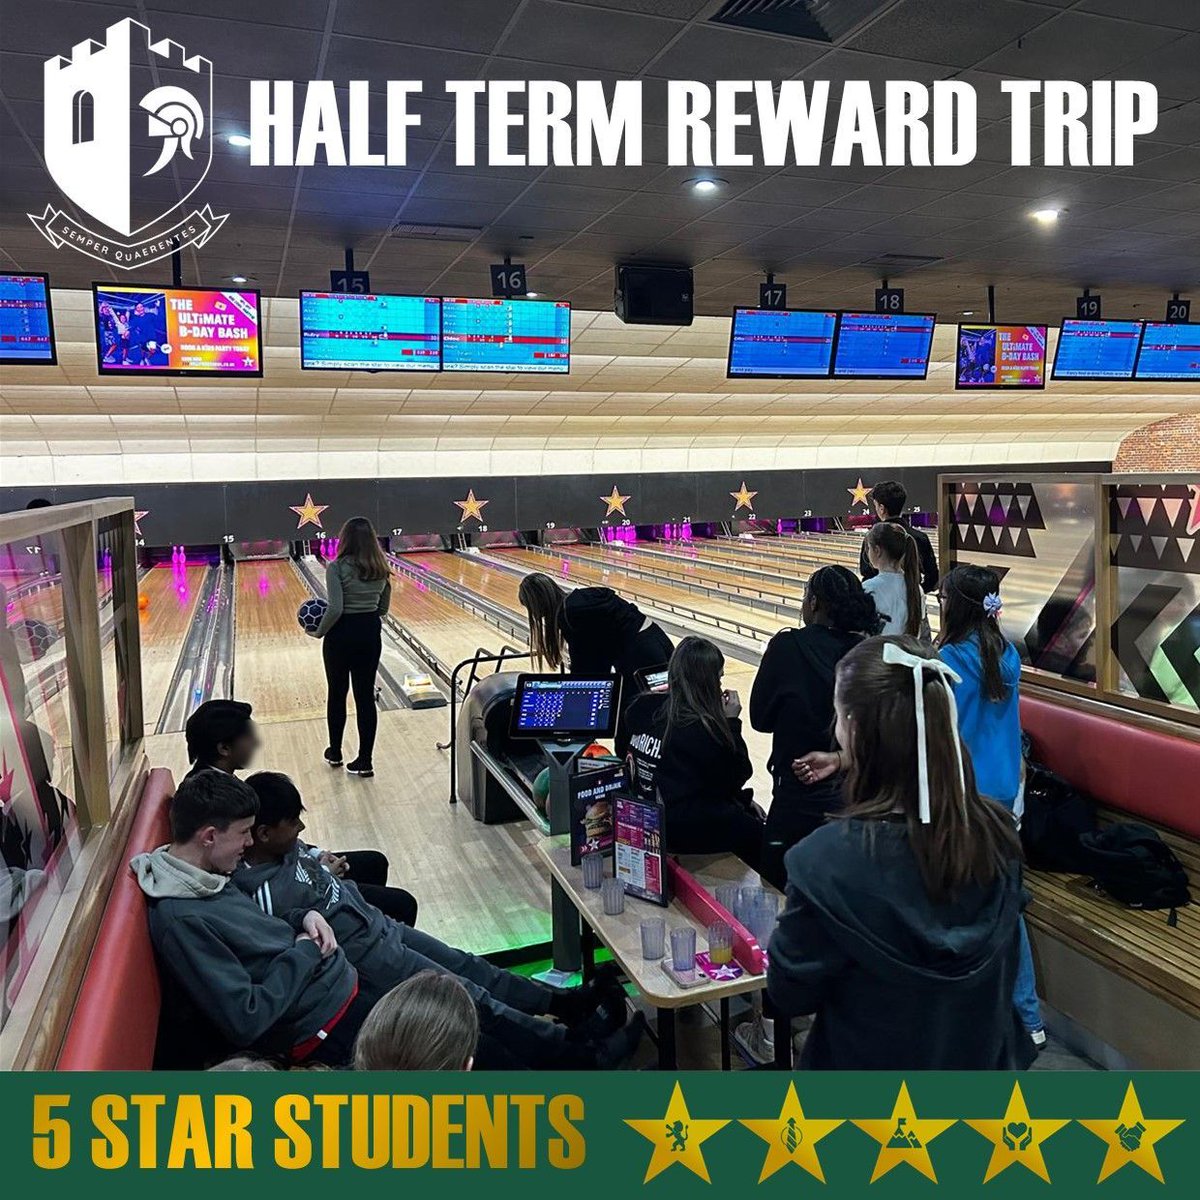 On Friday 26th April, our Half Term Reward Trip took place @HollywoodBowl, as a special treat for our #5starstudents who gained the required level of attendance, achievement points and positive behaviour for the previous half term.